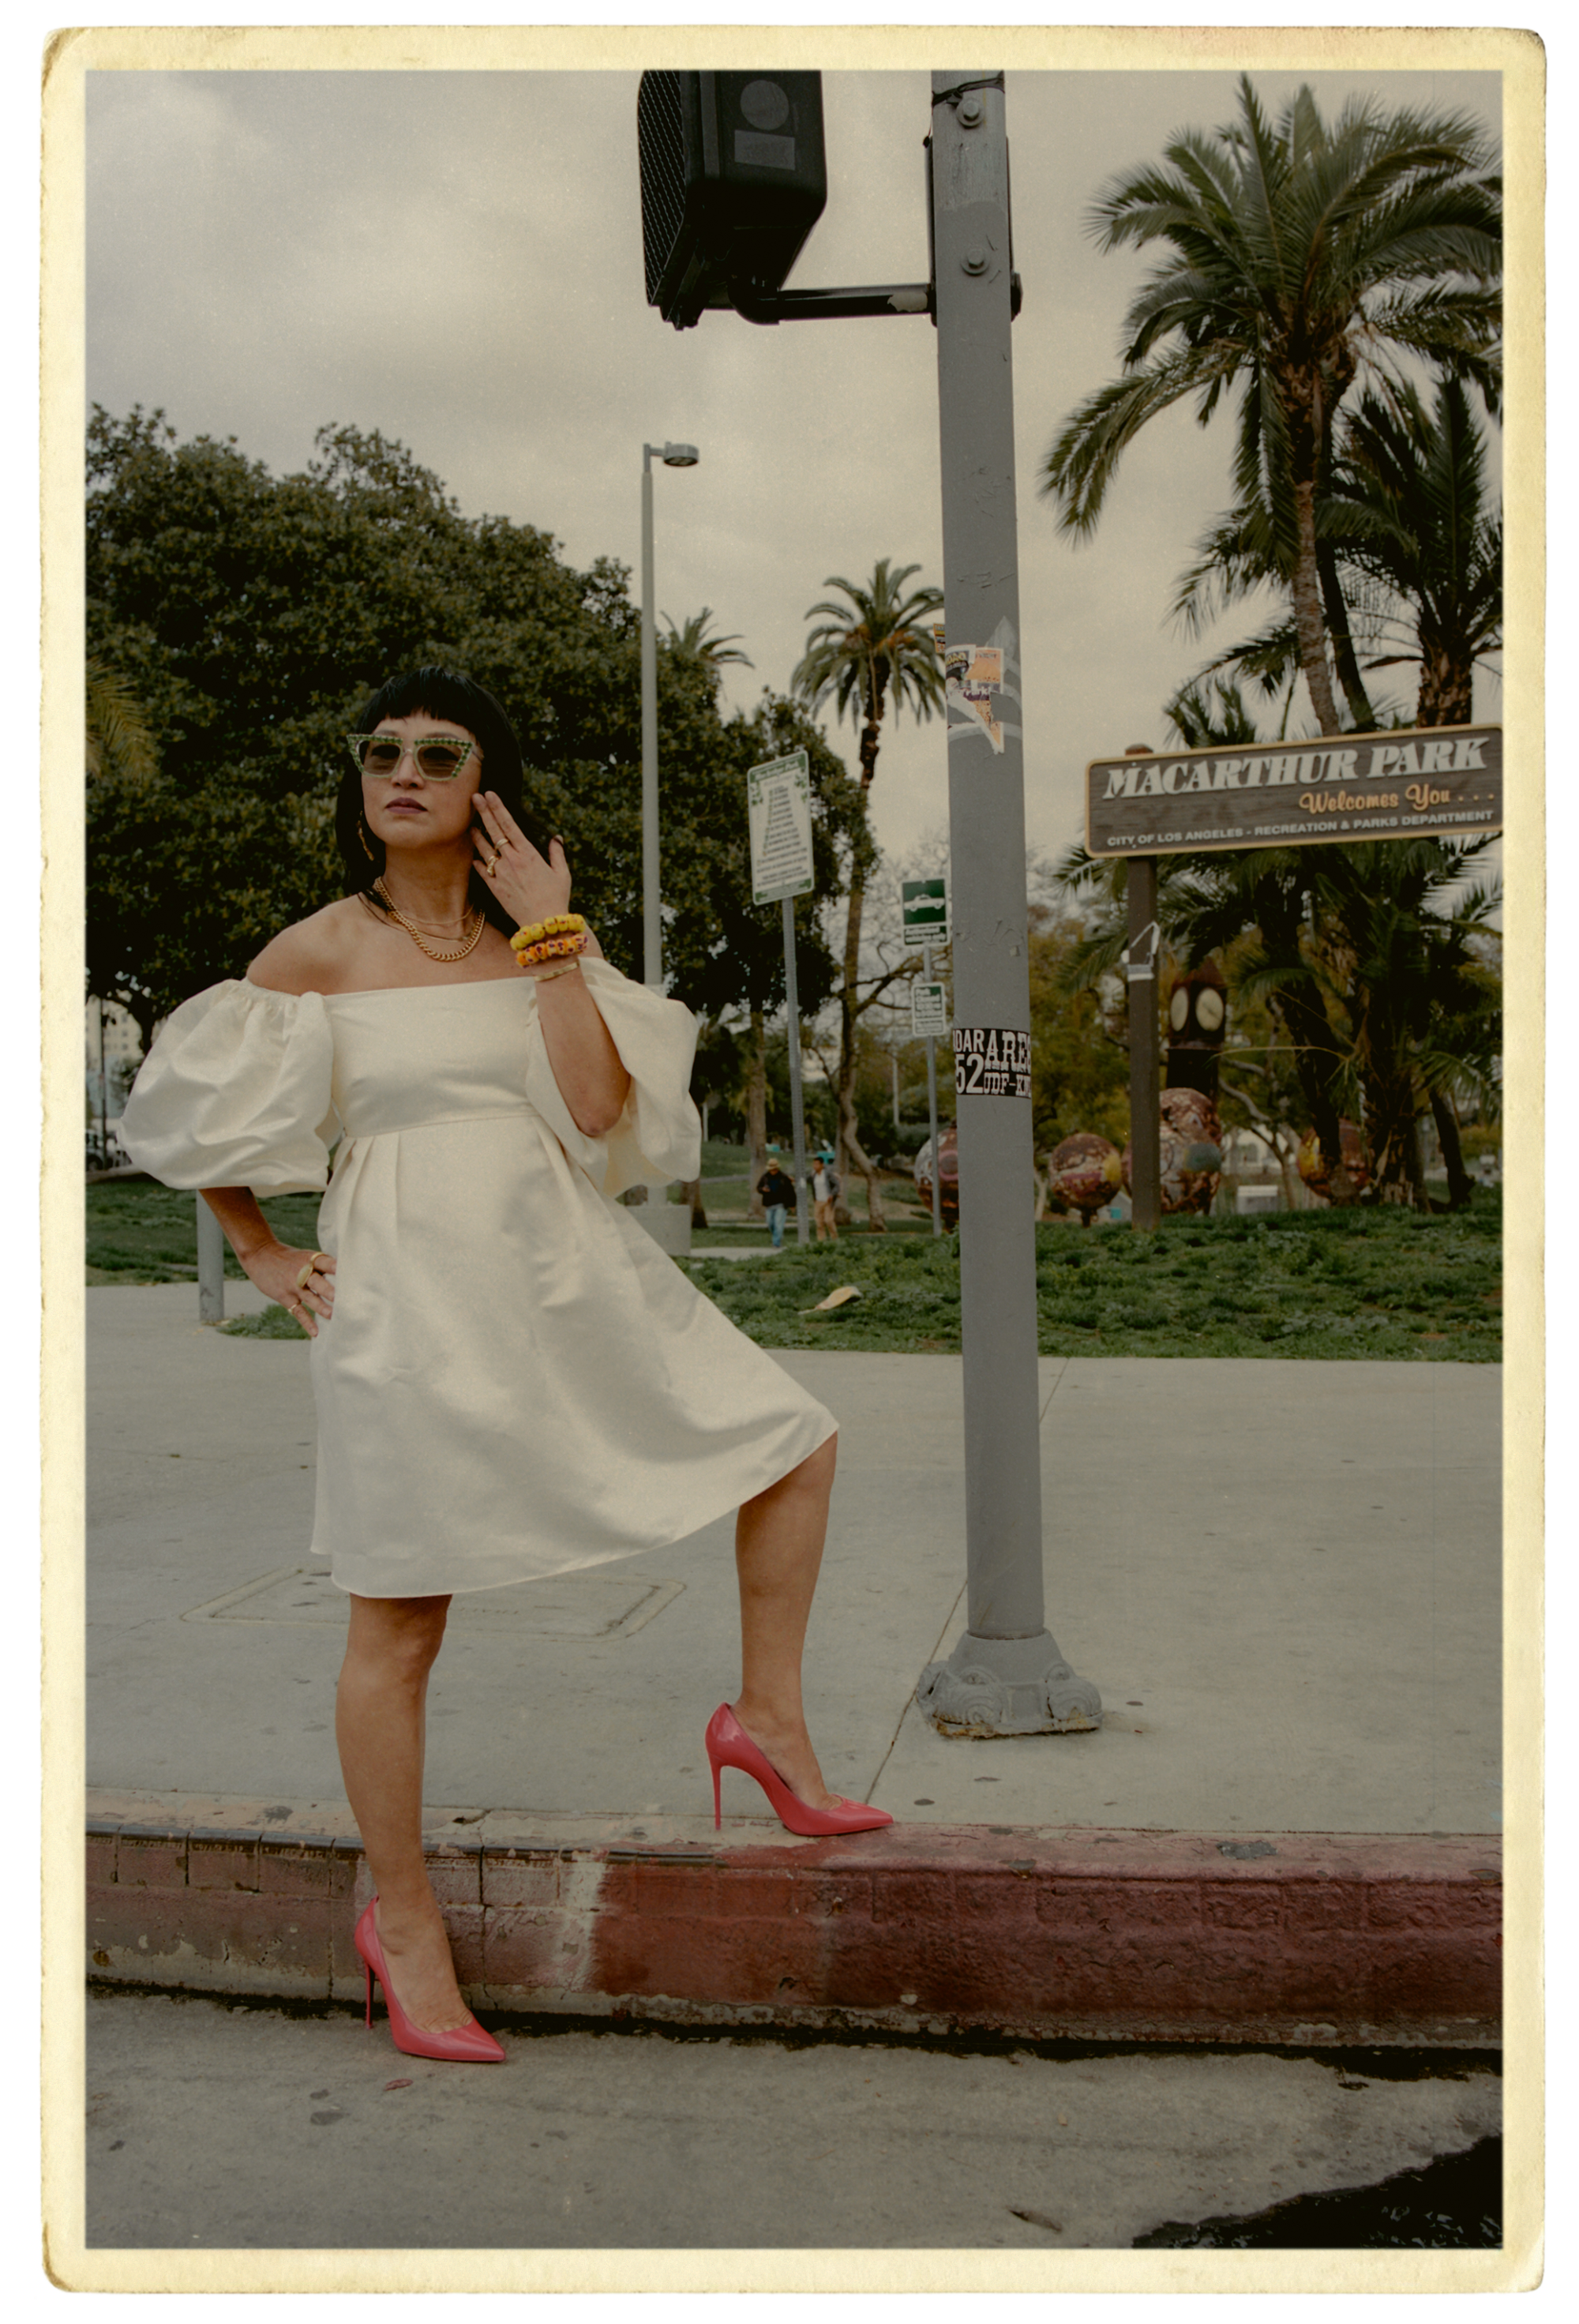 Christine Y. Kim poses in front of MacArthur Park sign